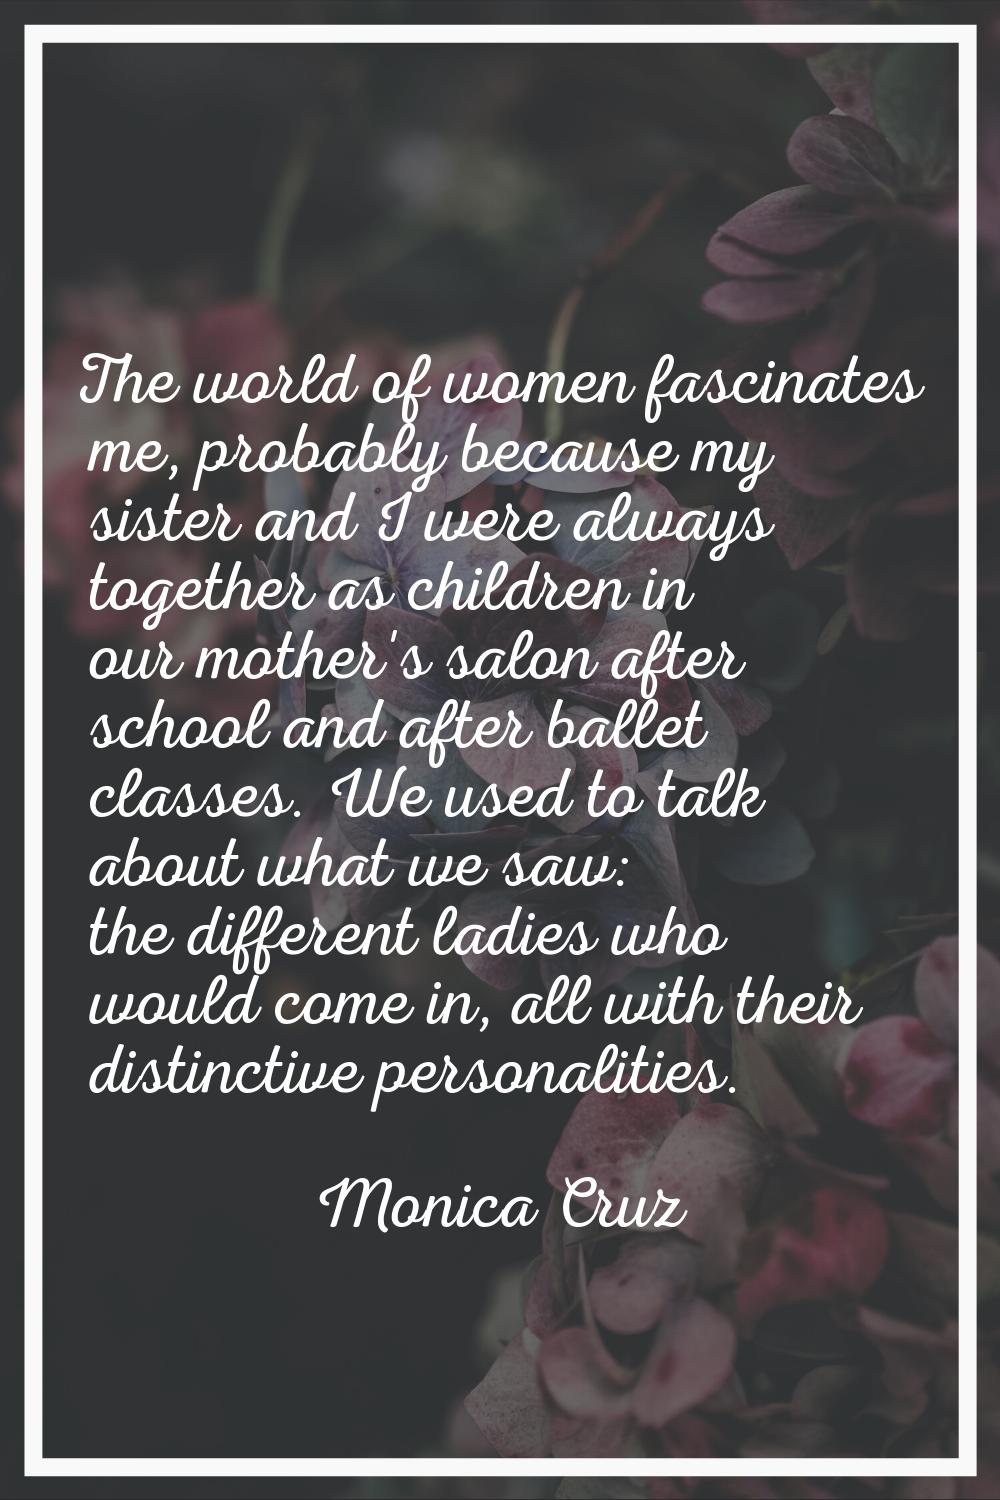 The world of women fascinates me, probably because my sister and I were always together as children